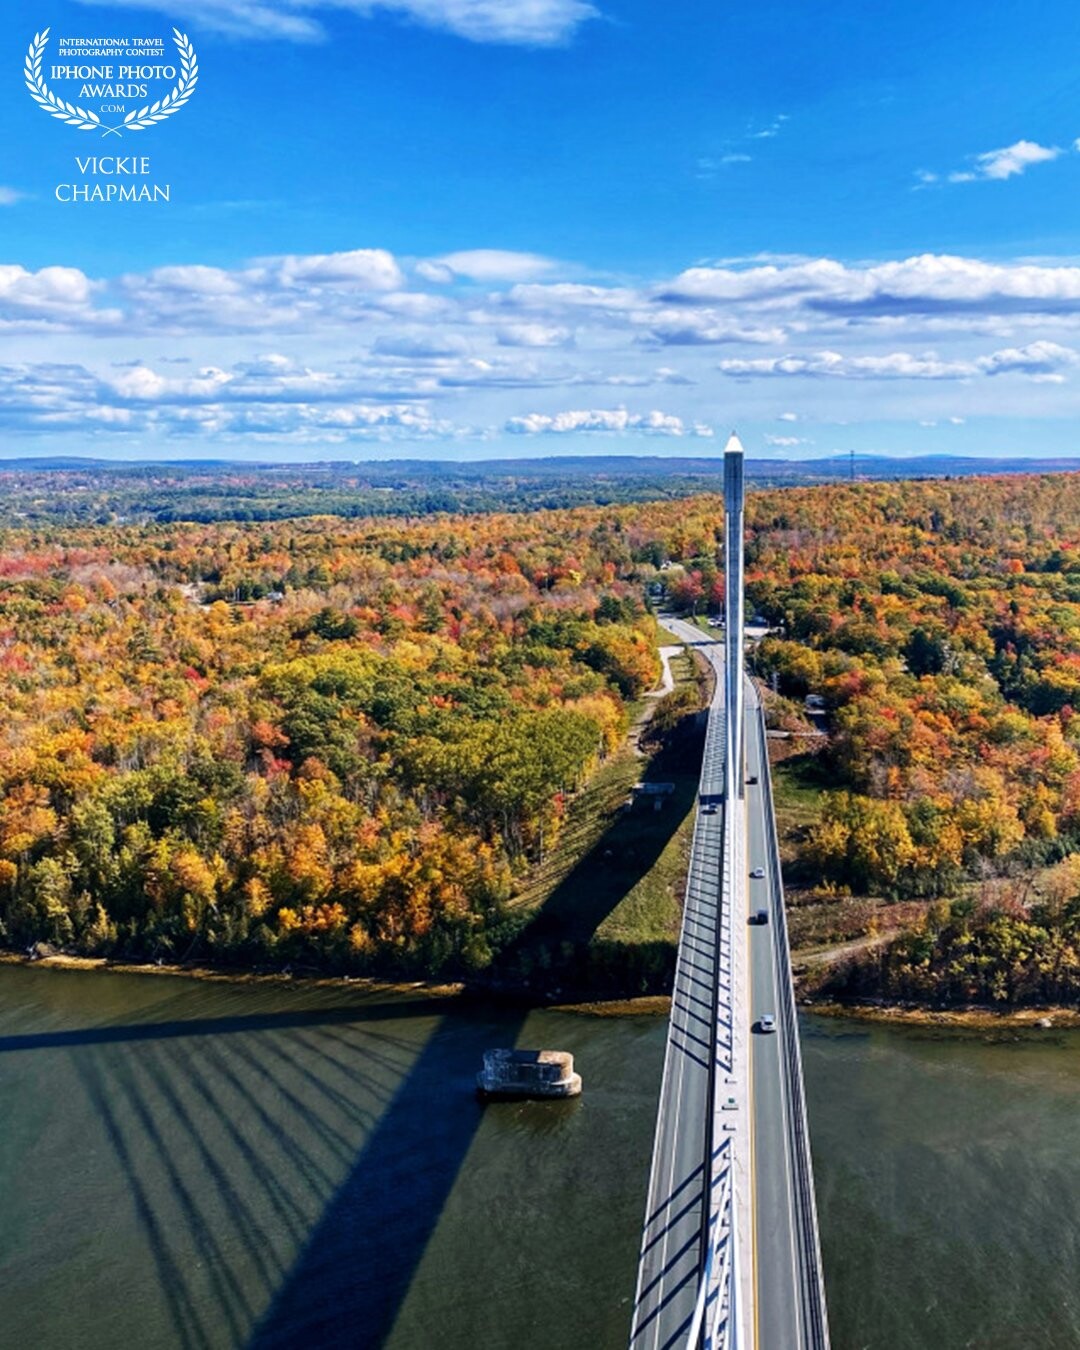 This was the magnificent view from the Penobscot Narrows Bridge Observatory in Maine, US. My vantage point of looking down on the bridge gave it a unique leading line into the horizon. I also loved the shadows in the water that hints of the actual construction of the bridge.